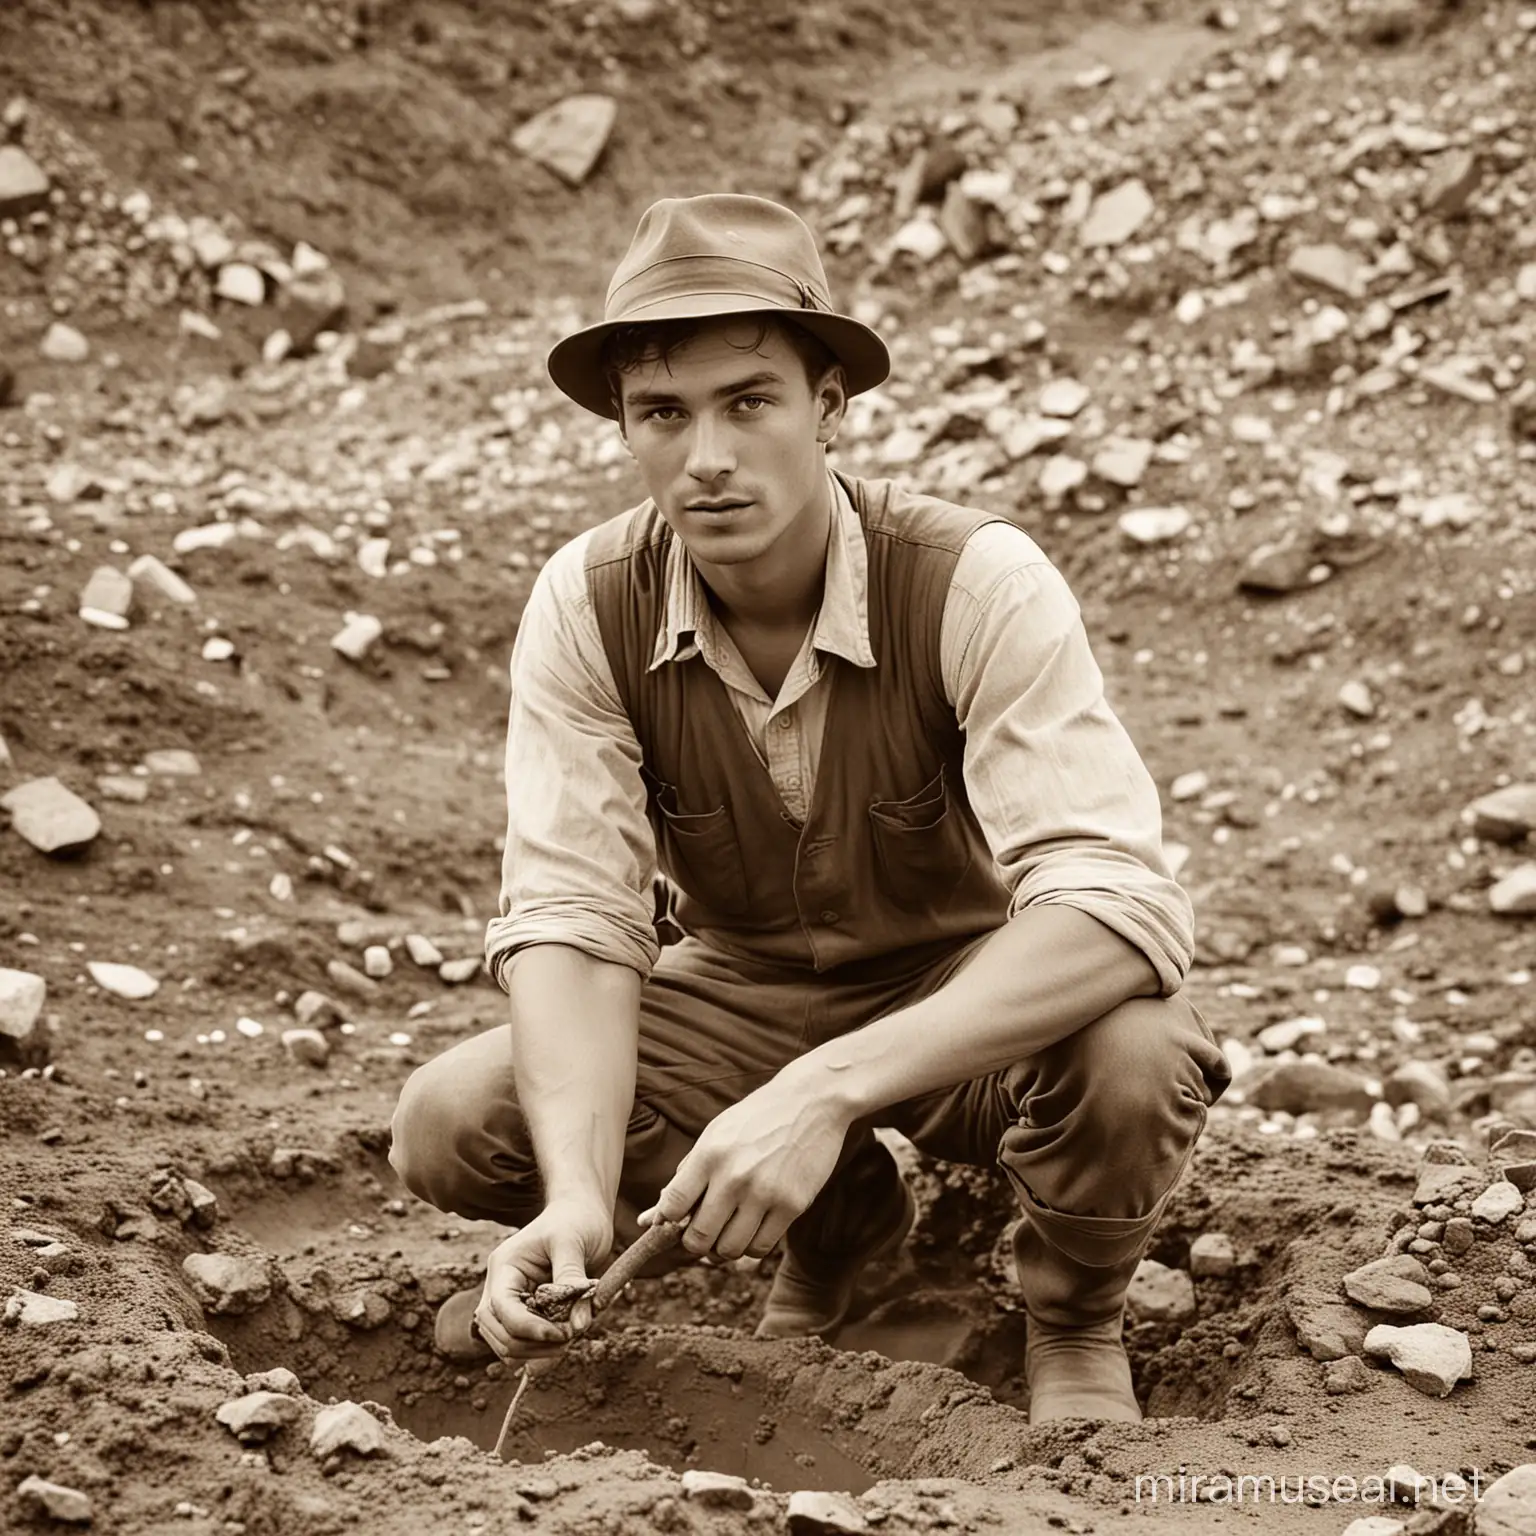 Archaeologist, young man, 1920s, europe, brown hair, hat, excavation site